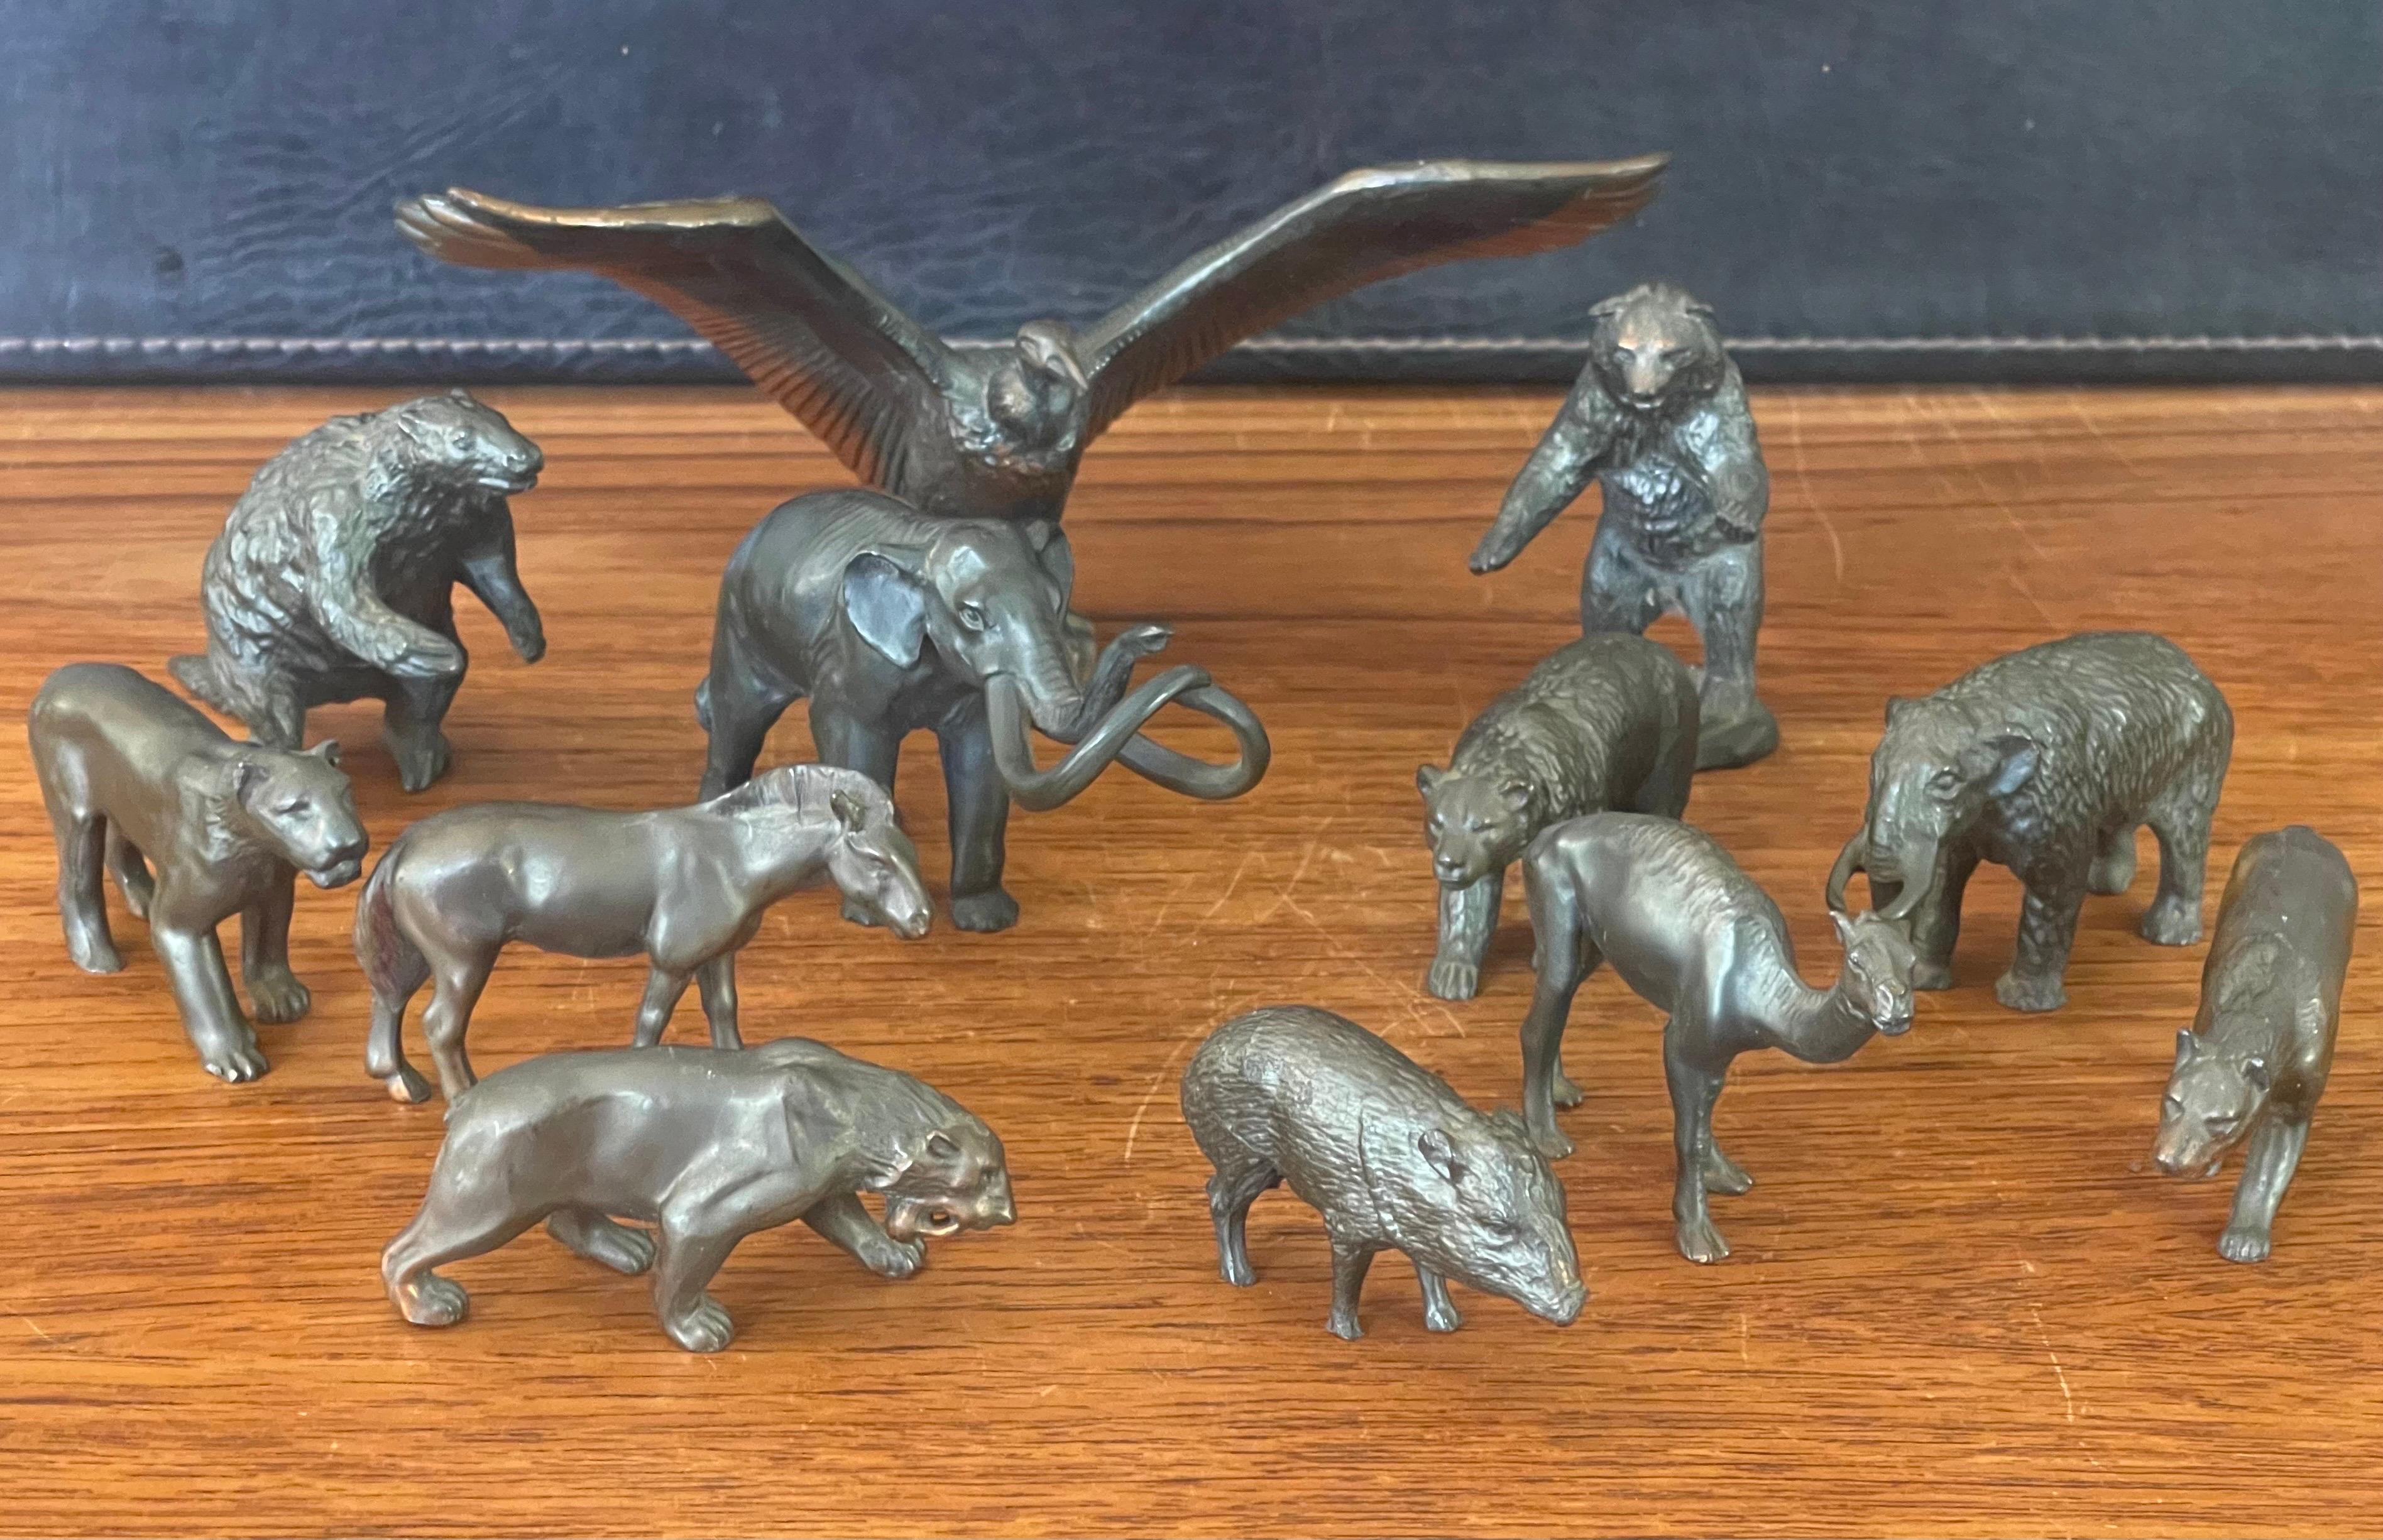 A very rare collection of twelve miniature bronze ice age mammal sculptures that were created by Wm Otto for the Rancho La Brea Tar Pits museum and gift shop circa, late 1950s. The sculptures were designed based on restorations from skeletons